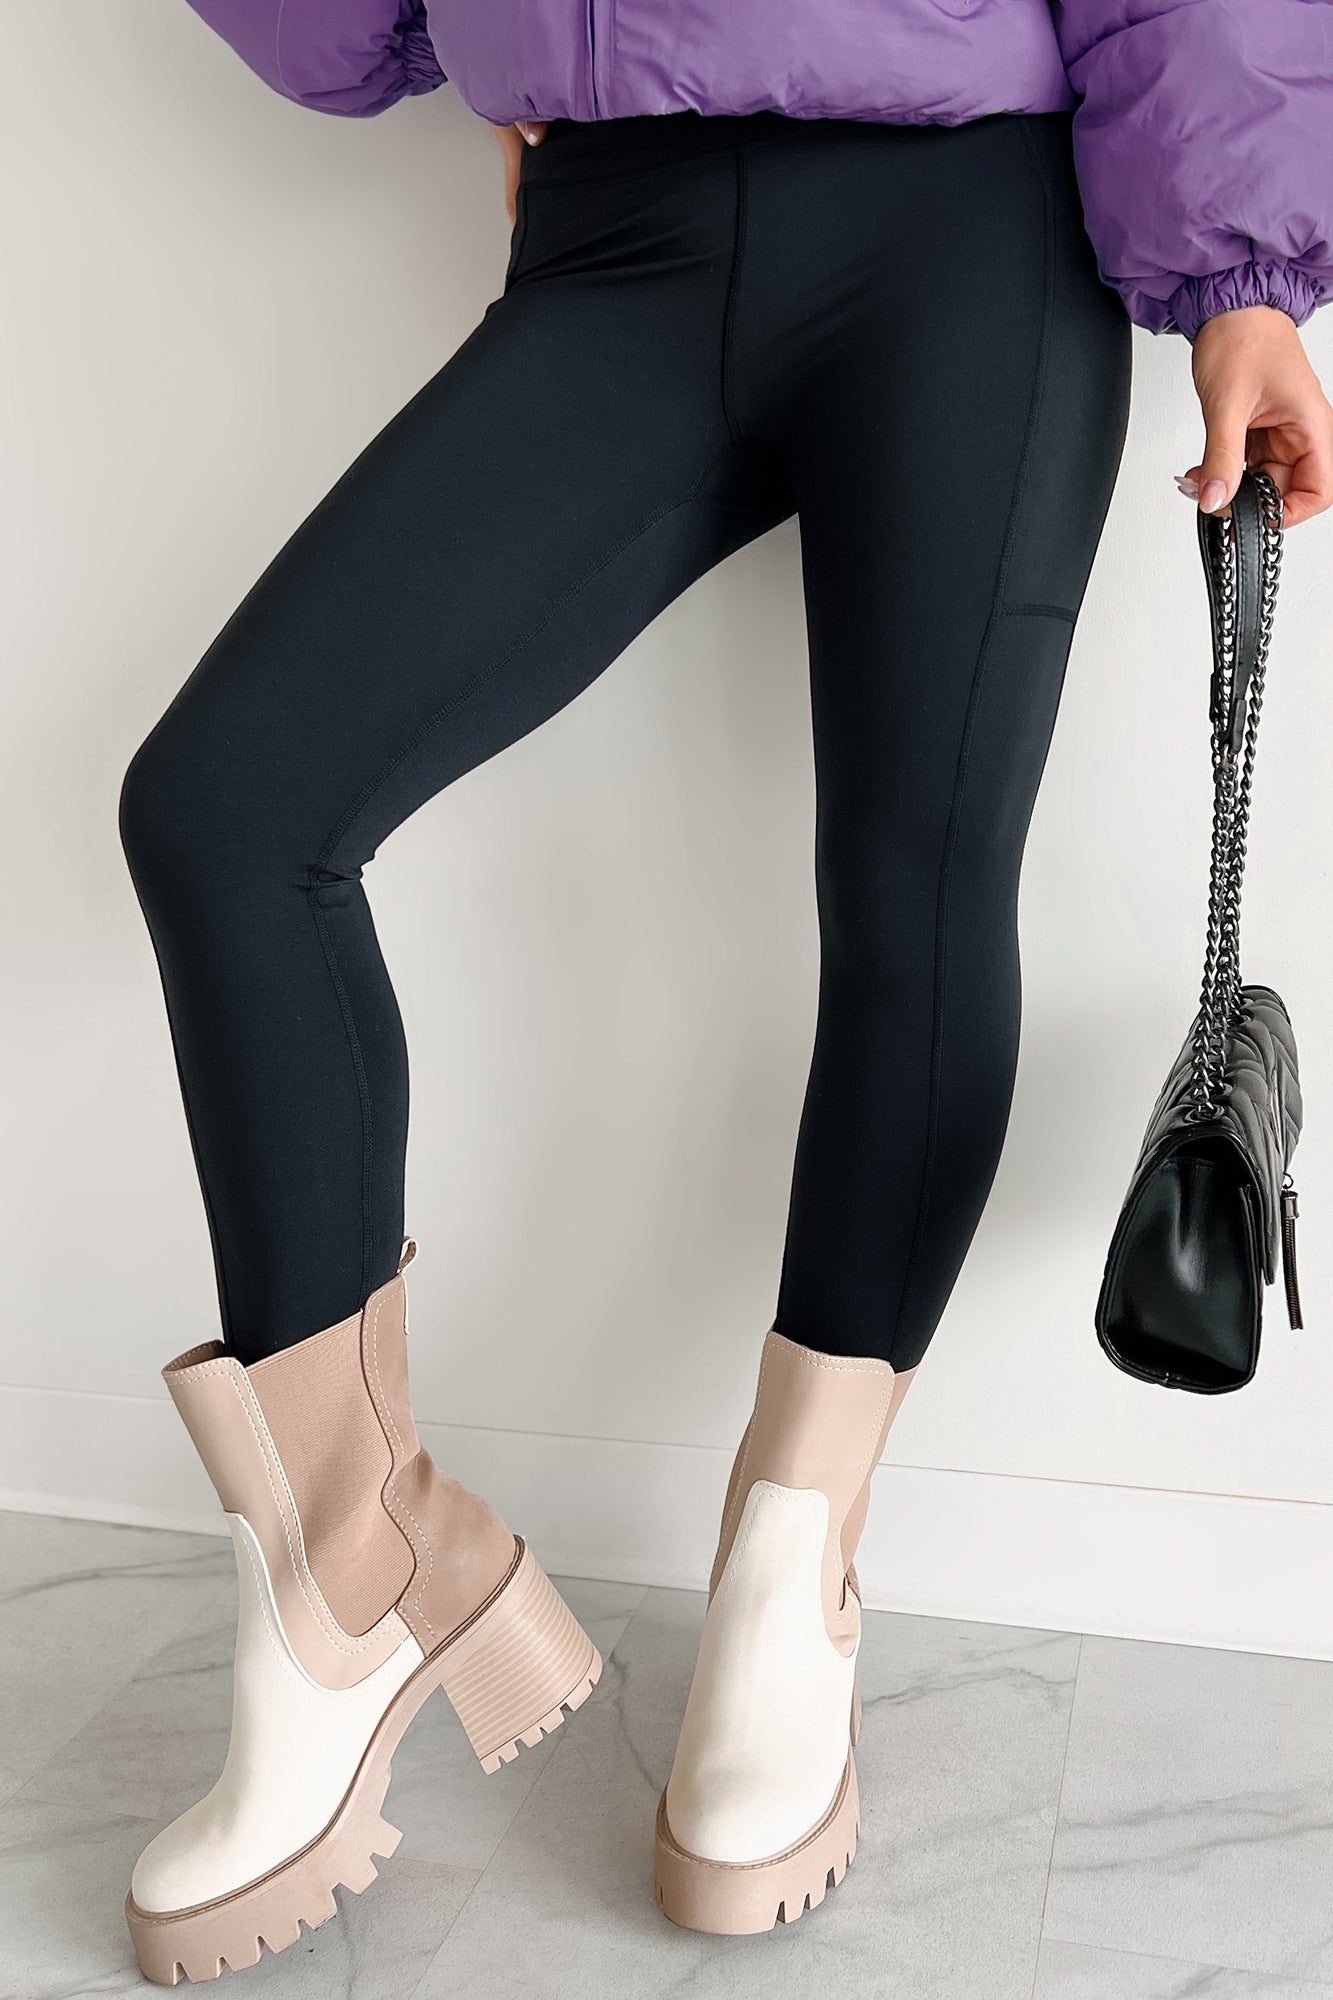 FP Movement by Free People Midnight Magic Leggings SMALL 7/8 Leggings  Cutouts : r/gym_apparel_for_women